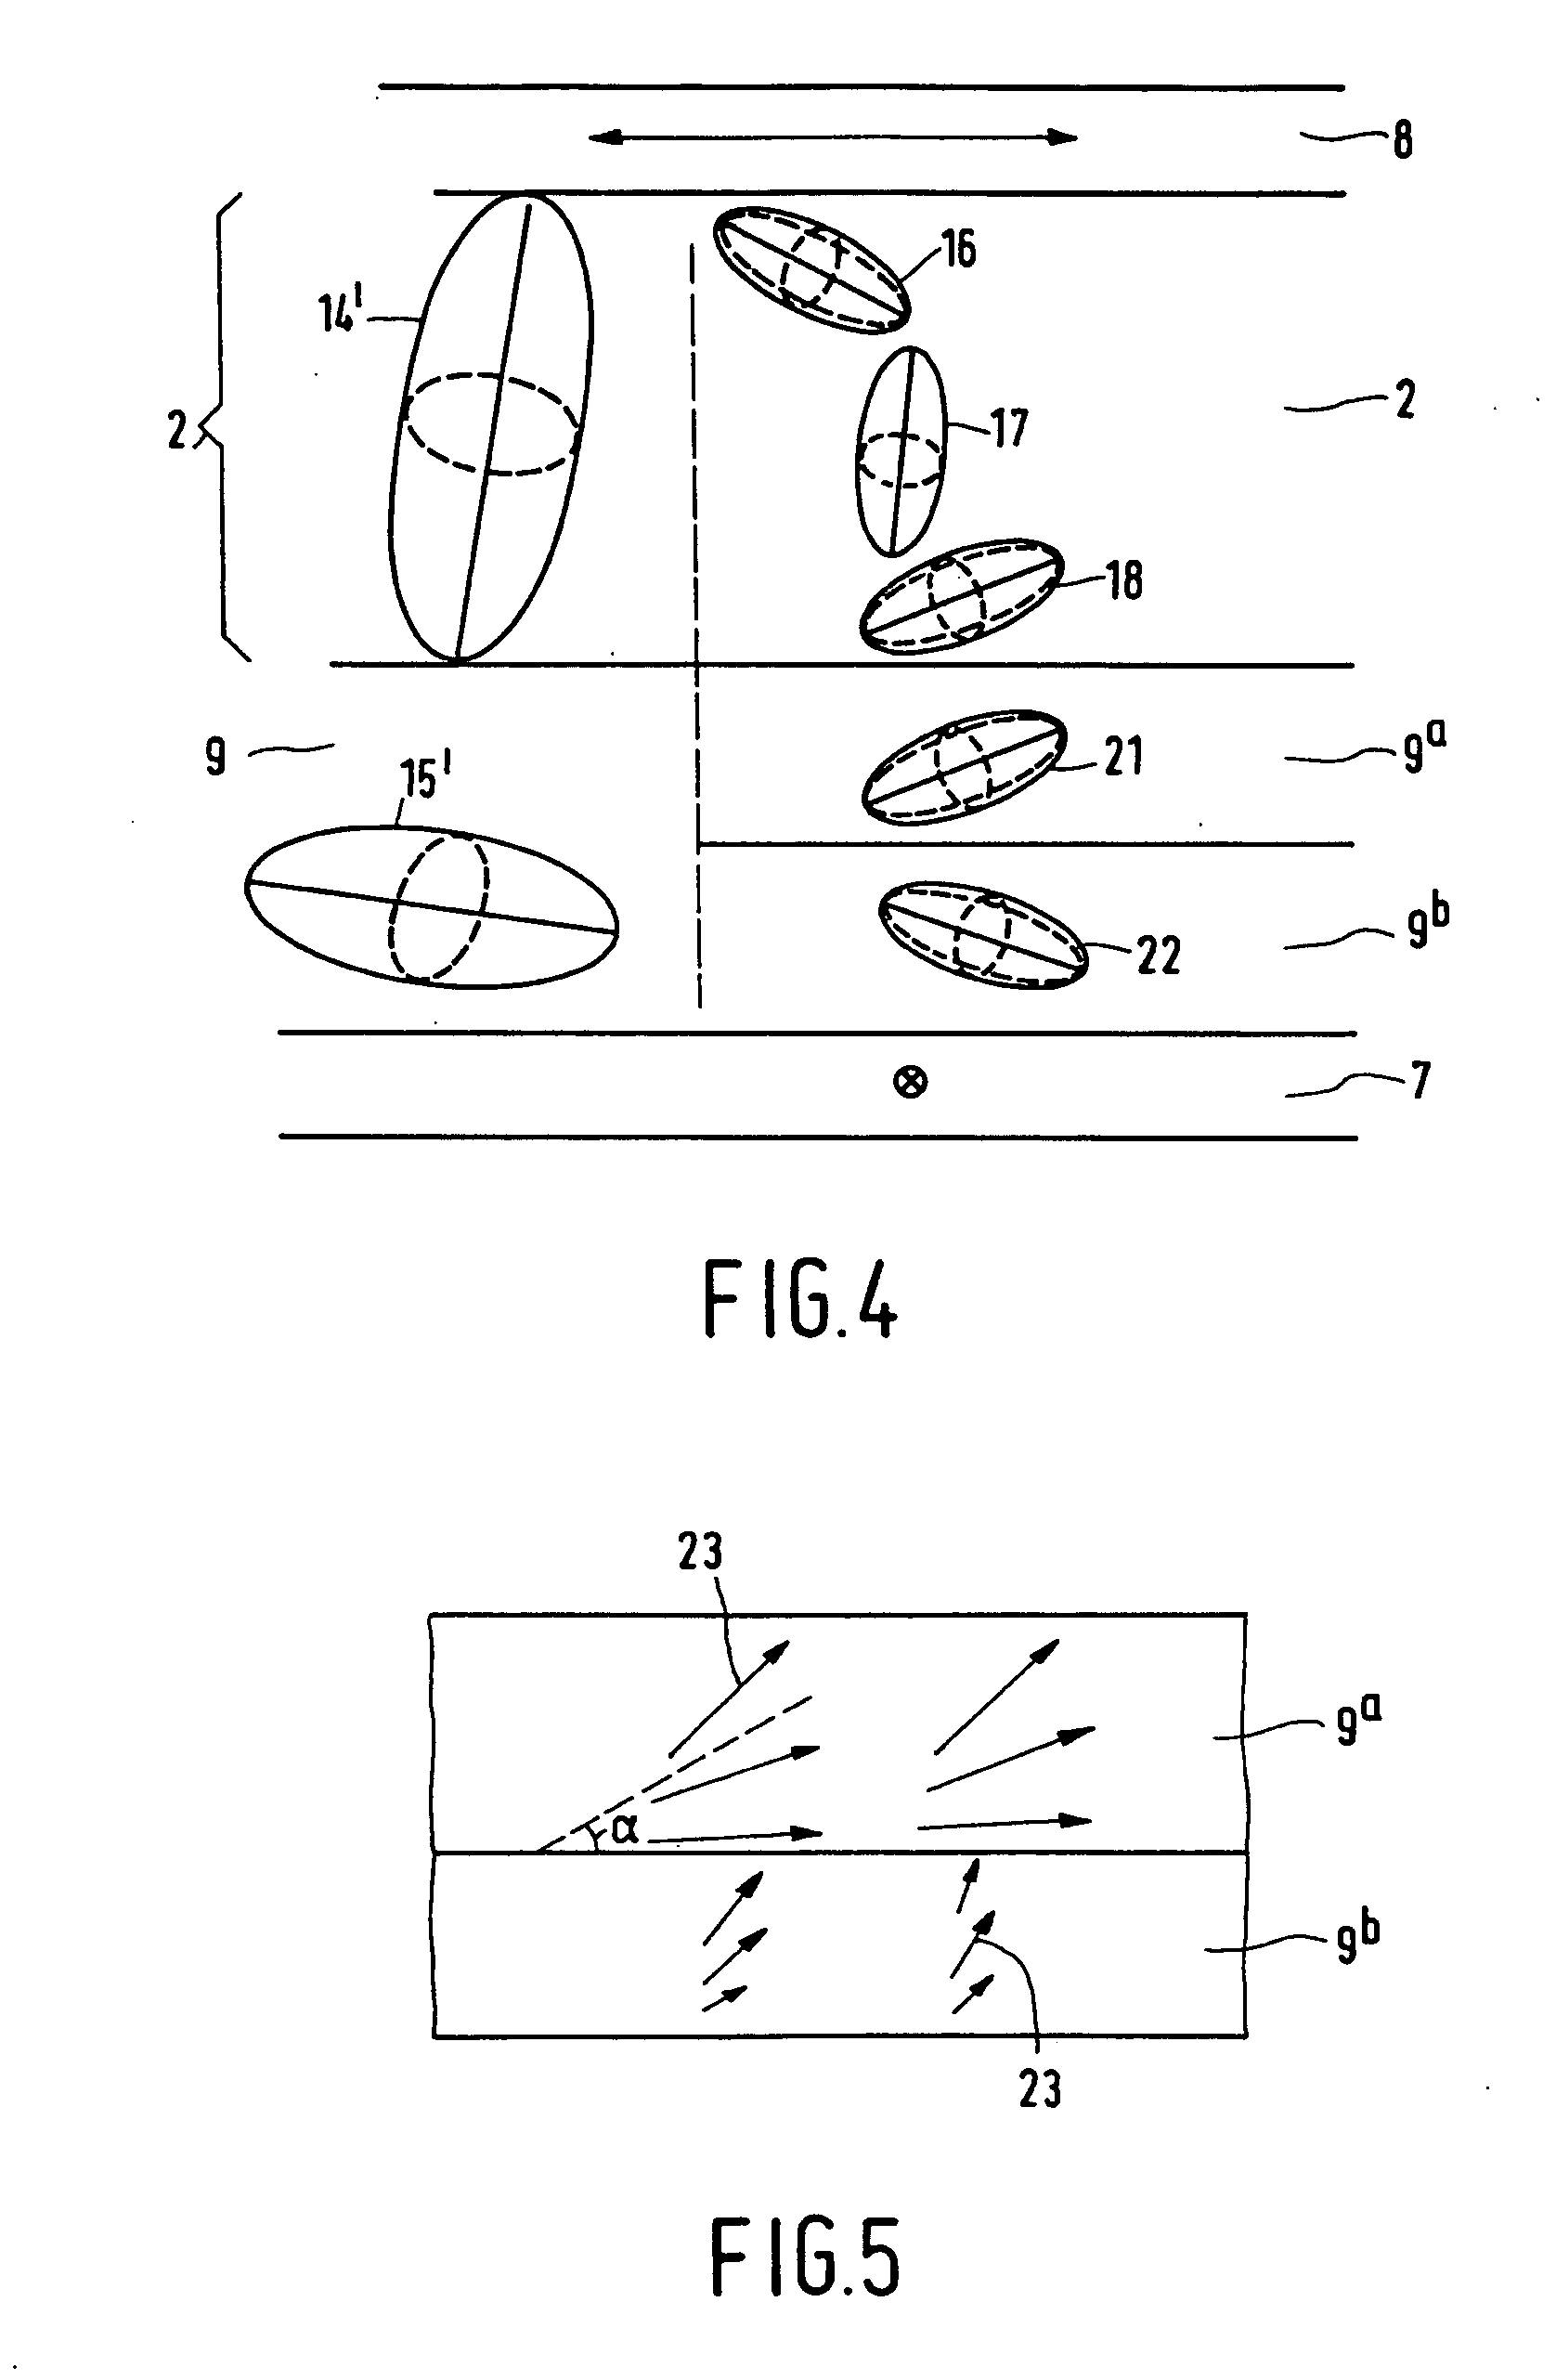 Liquid-crystal display device, compensator layer and method of manufacturing retardation foil